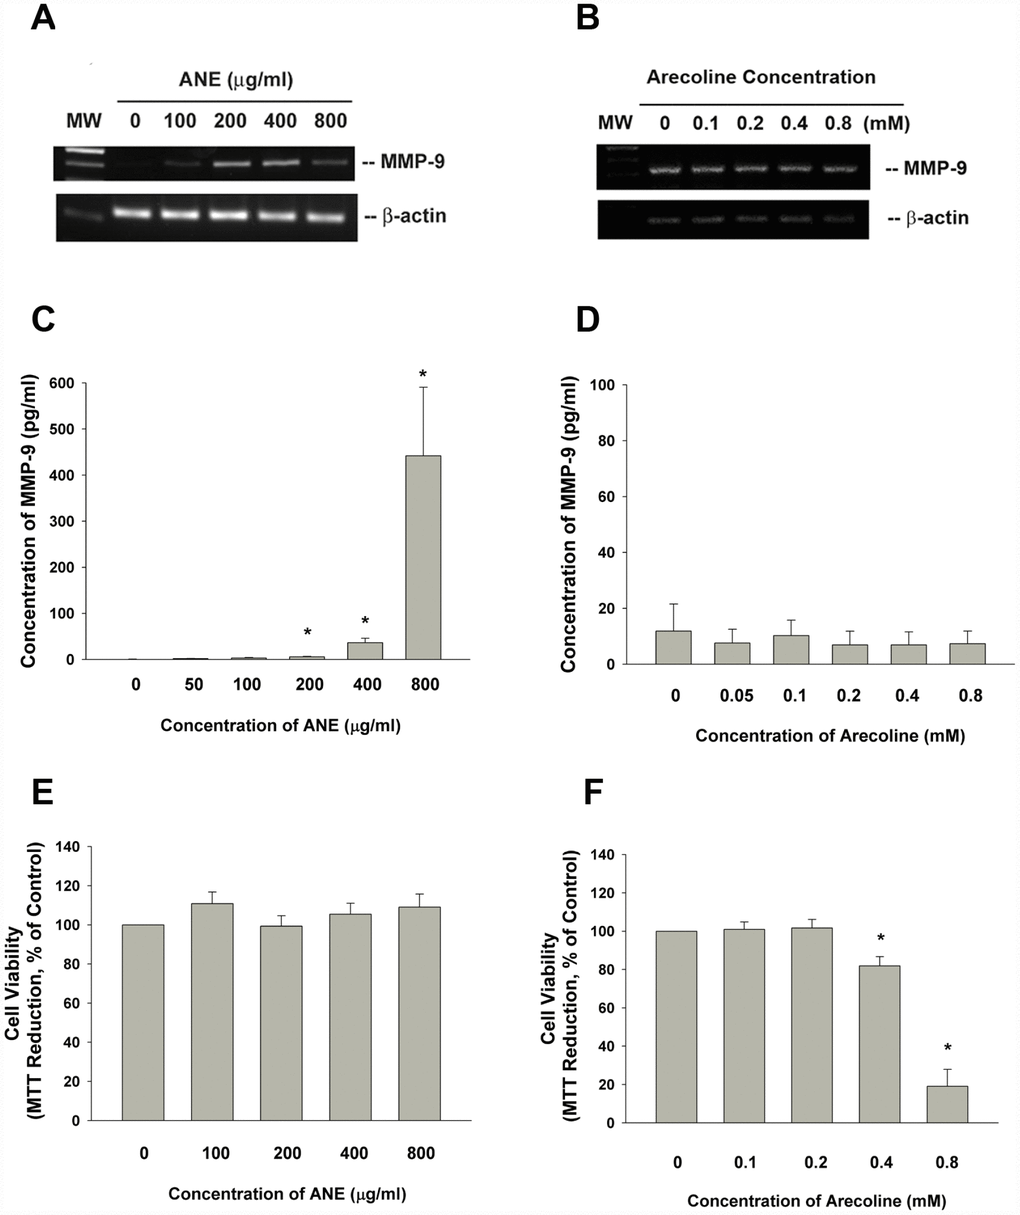 Effect of ANE and arecoline on MMP-9 expression/secretion of SAS cells. (A) Effect of ANE (100-800 μg/ml) and (B) Arecoline (0.1-0.8 mM) on MMP-9 mRNA expression in SAS oral cancer epithelial cells as analyzed by RT-PCR. One representative semi-quantitative RT-PCR result was shown. (C) Effect of ANE (50-800 μg/ml) on MMP-9 secretion of SAS cells, after 3 days of exposure, (D) Effect of arecoline (0.05-0.8 mM) on MMP-9 secretion of SAS cells after 3 days of exposure, Results were expressed as Mean ± SE (pg/ml), (E) Effect of ANE (100-800 μg/ml) on cytotoxicity to SAS cells, (F) Effect of arecoline (0.1-0.8 mM) on cytotoxicity to SAS cells, Results were expressed as percentage of control (as 100%, Mean ± SE). *denotes statistically significant difference between groups.